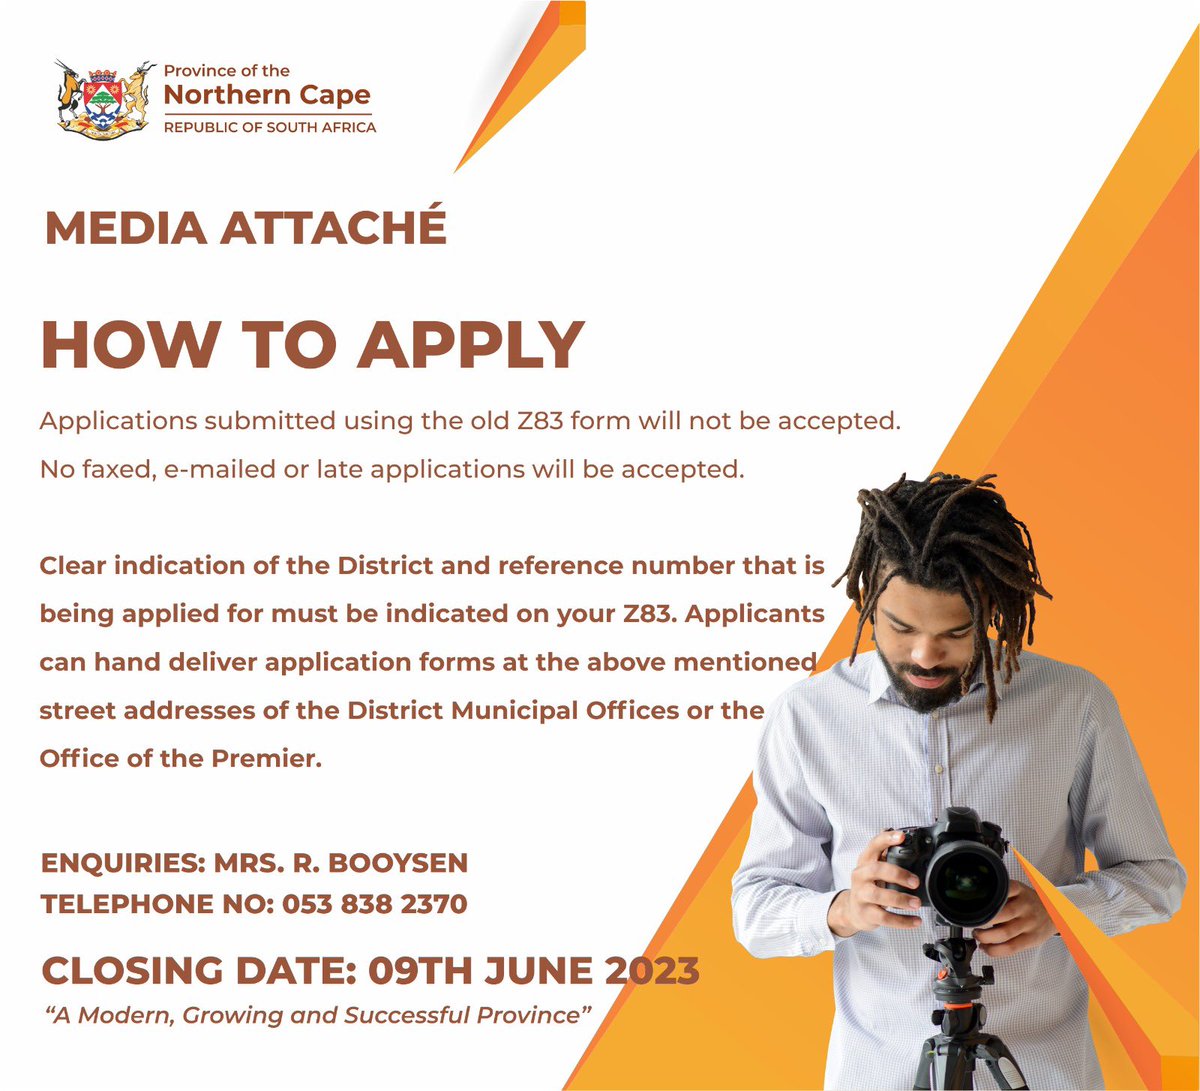 [MEDIA ATTACHÉ’S NEEDED] 📍

Please see the information in the thread and submit your application by 09 June 2023.

@ncnnlive @NCapeDSAC @NCape_Education @nc_doh @NC_drpw @NCDevEco 

#moderngrowingsuccessfulprovince
#northerncape
#communications 
#jobalert